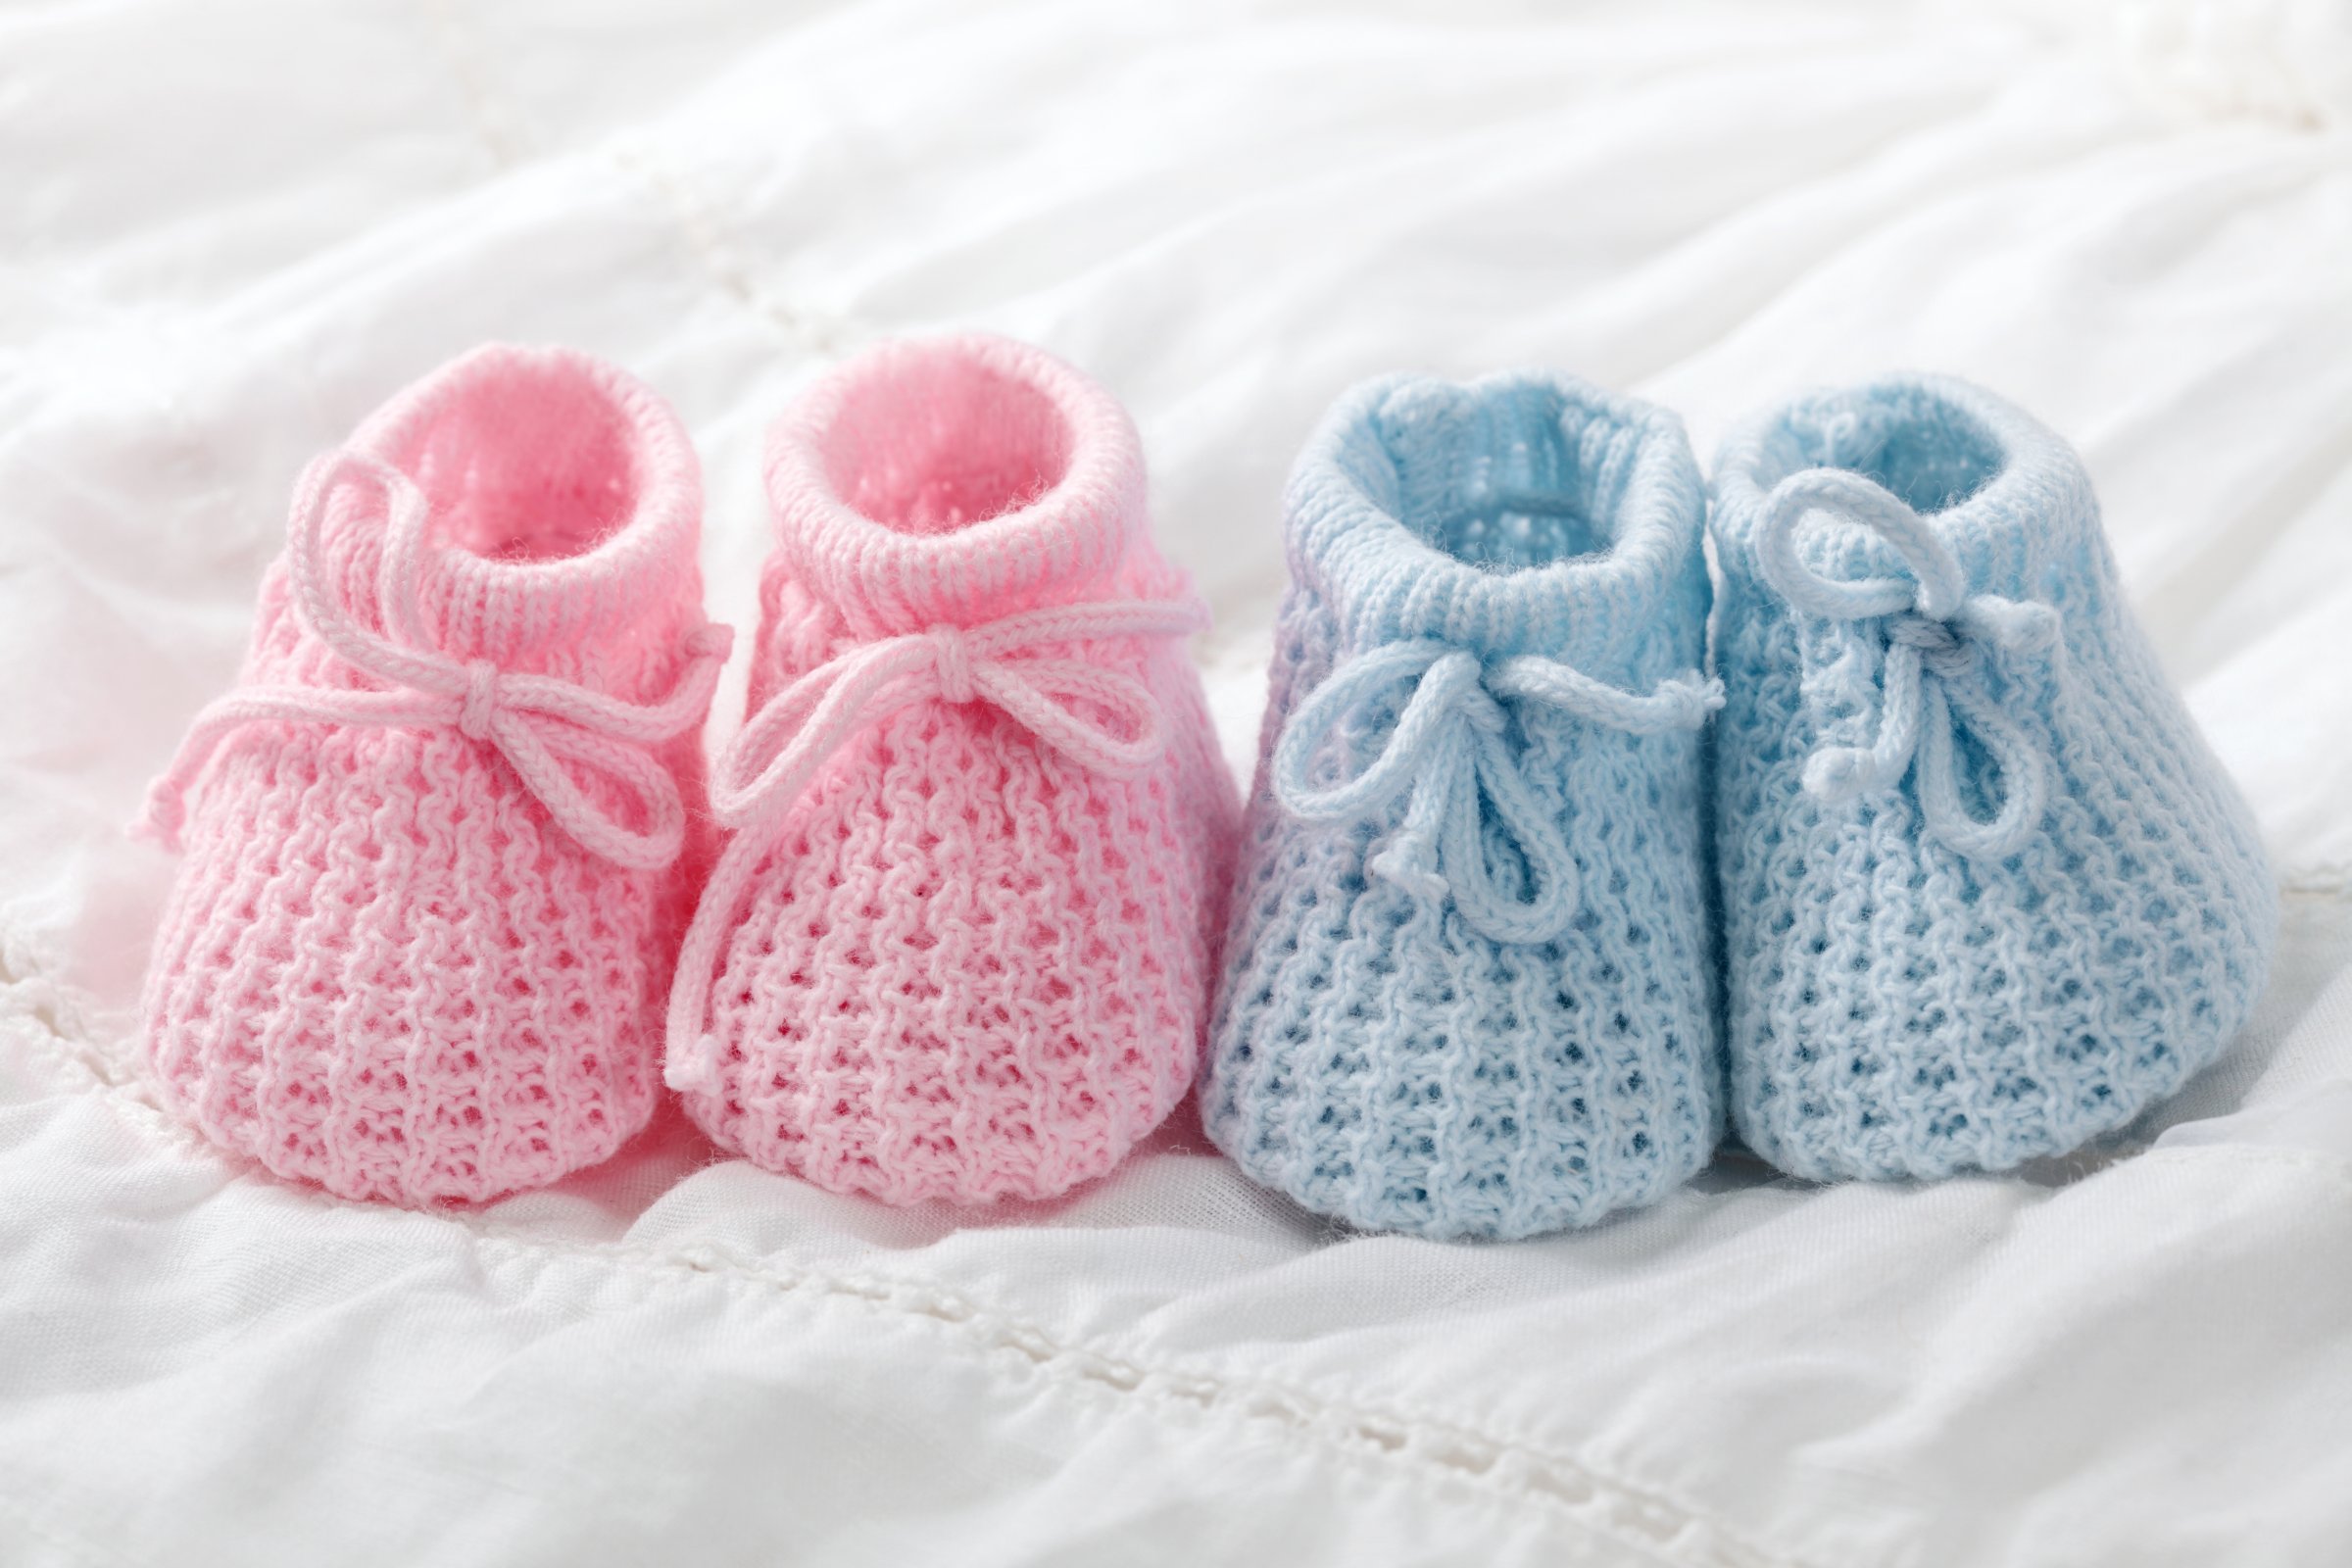 Blue and pink baby booties on white background